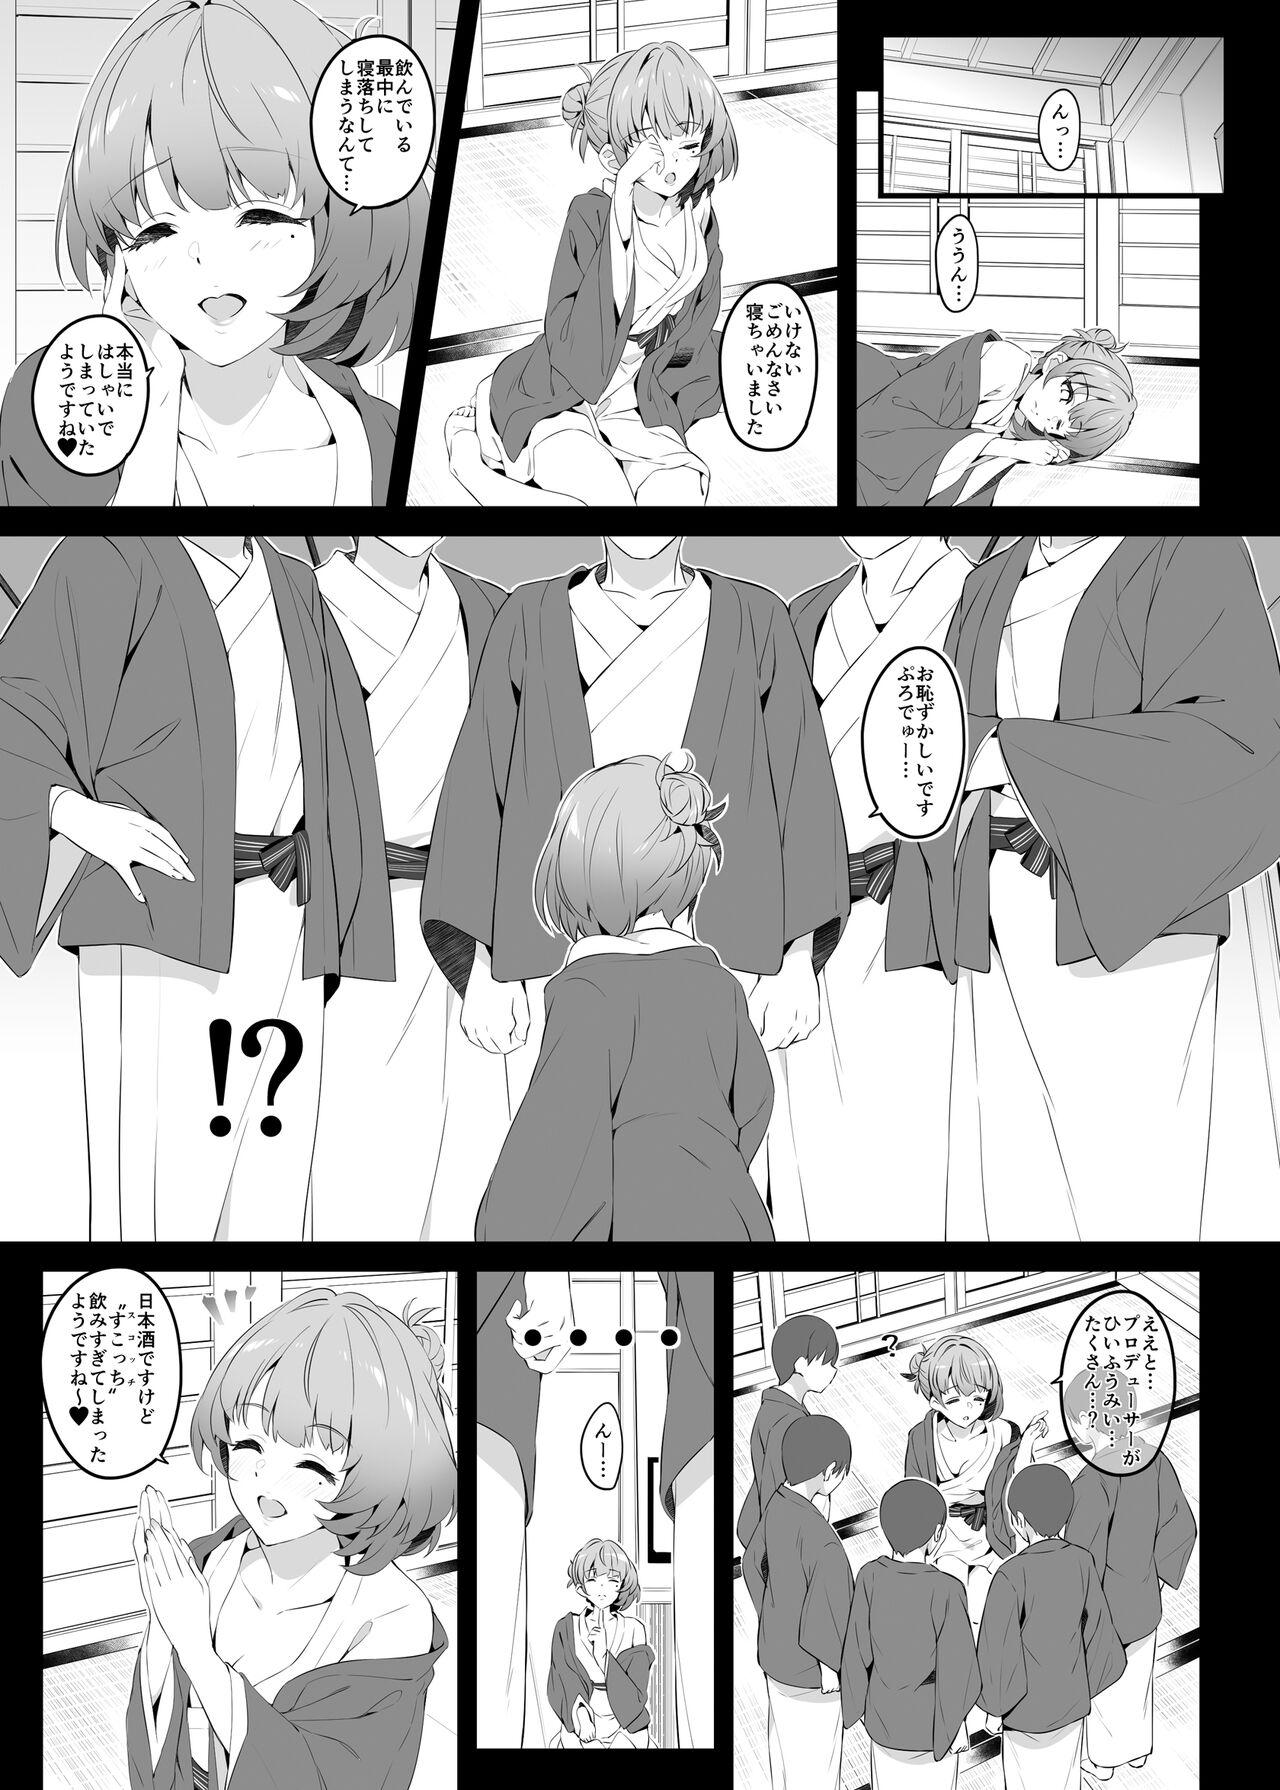 Hymen Flowers blooming at night and the kings in the dream. - The idolmaster Skinny - Page 9